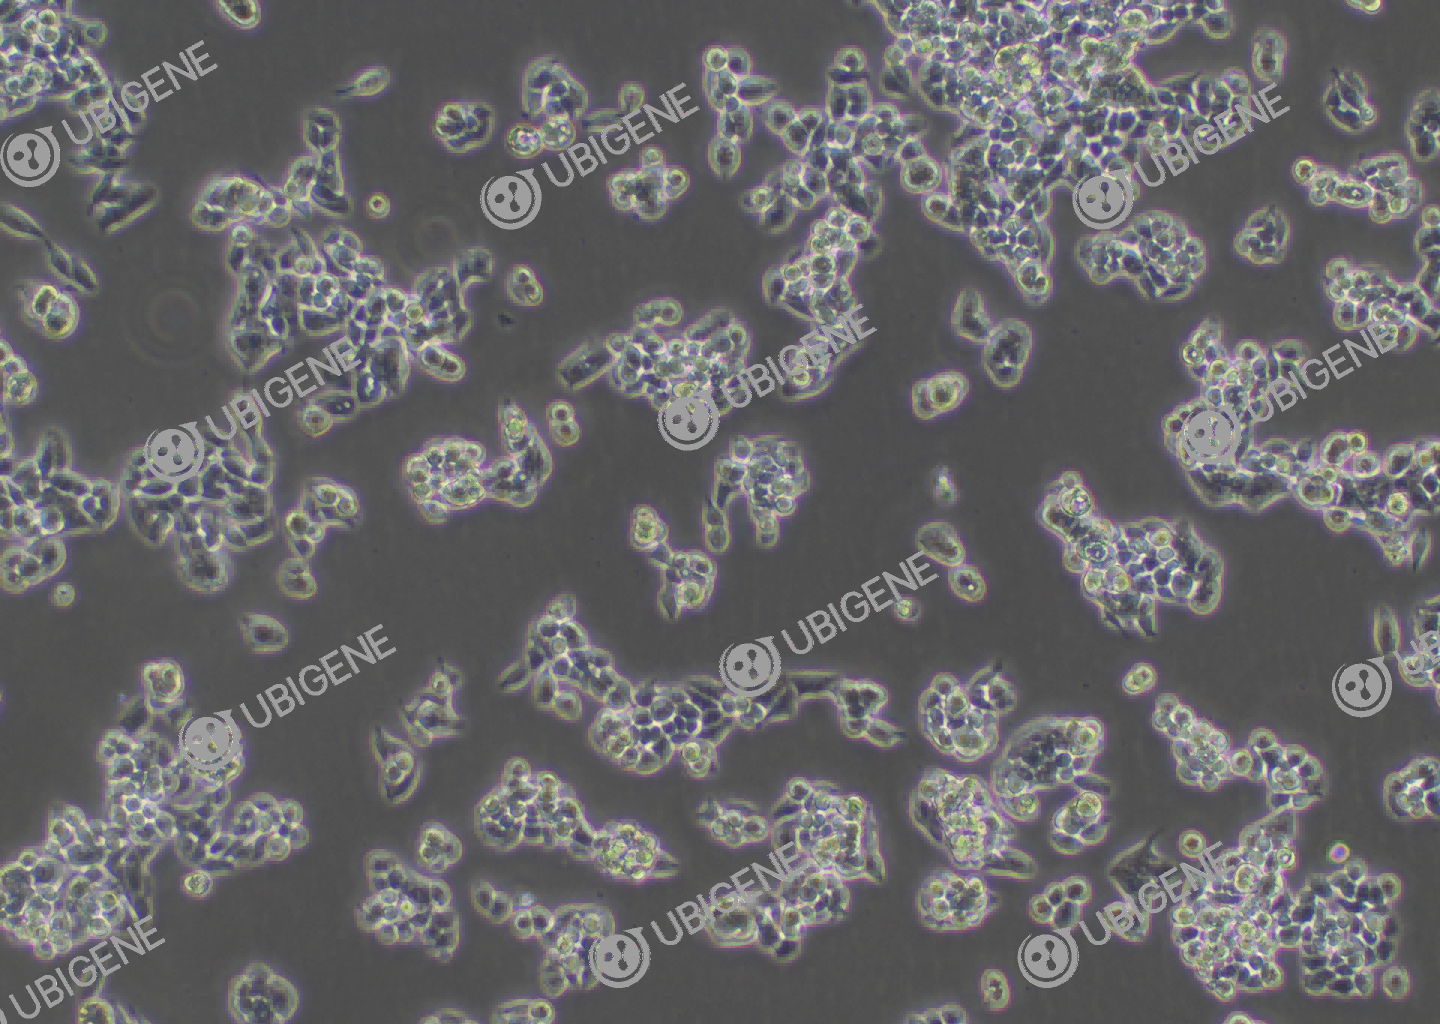 LS 174T cell line Cultured cell morphology